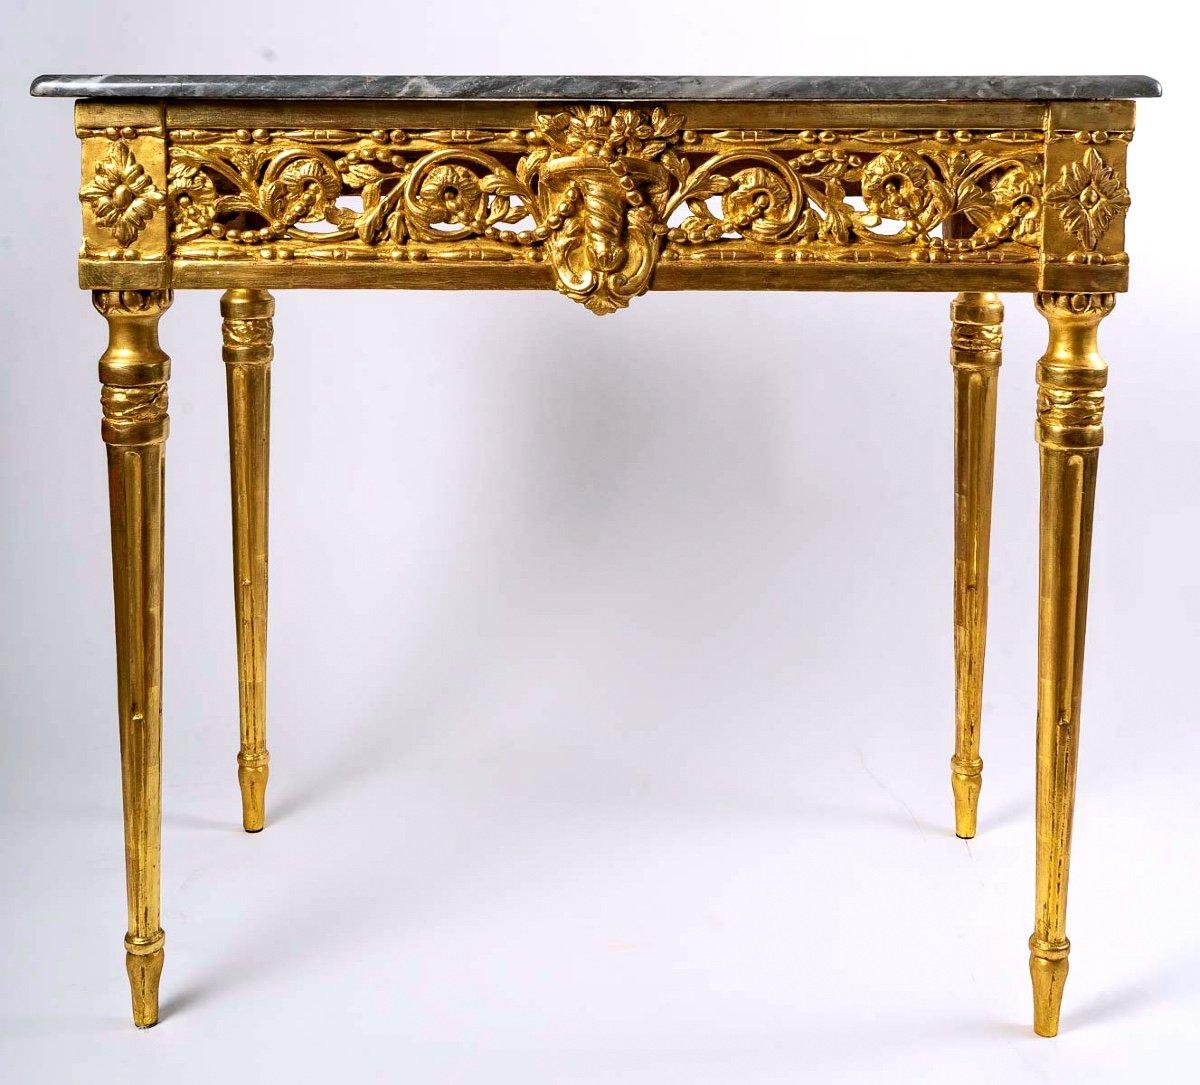 Louis XVI Gilded Wooden Console Table, 18 Century